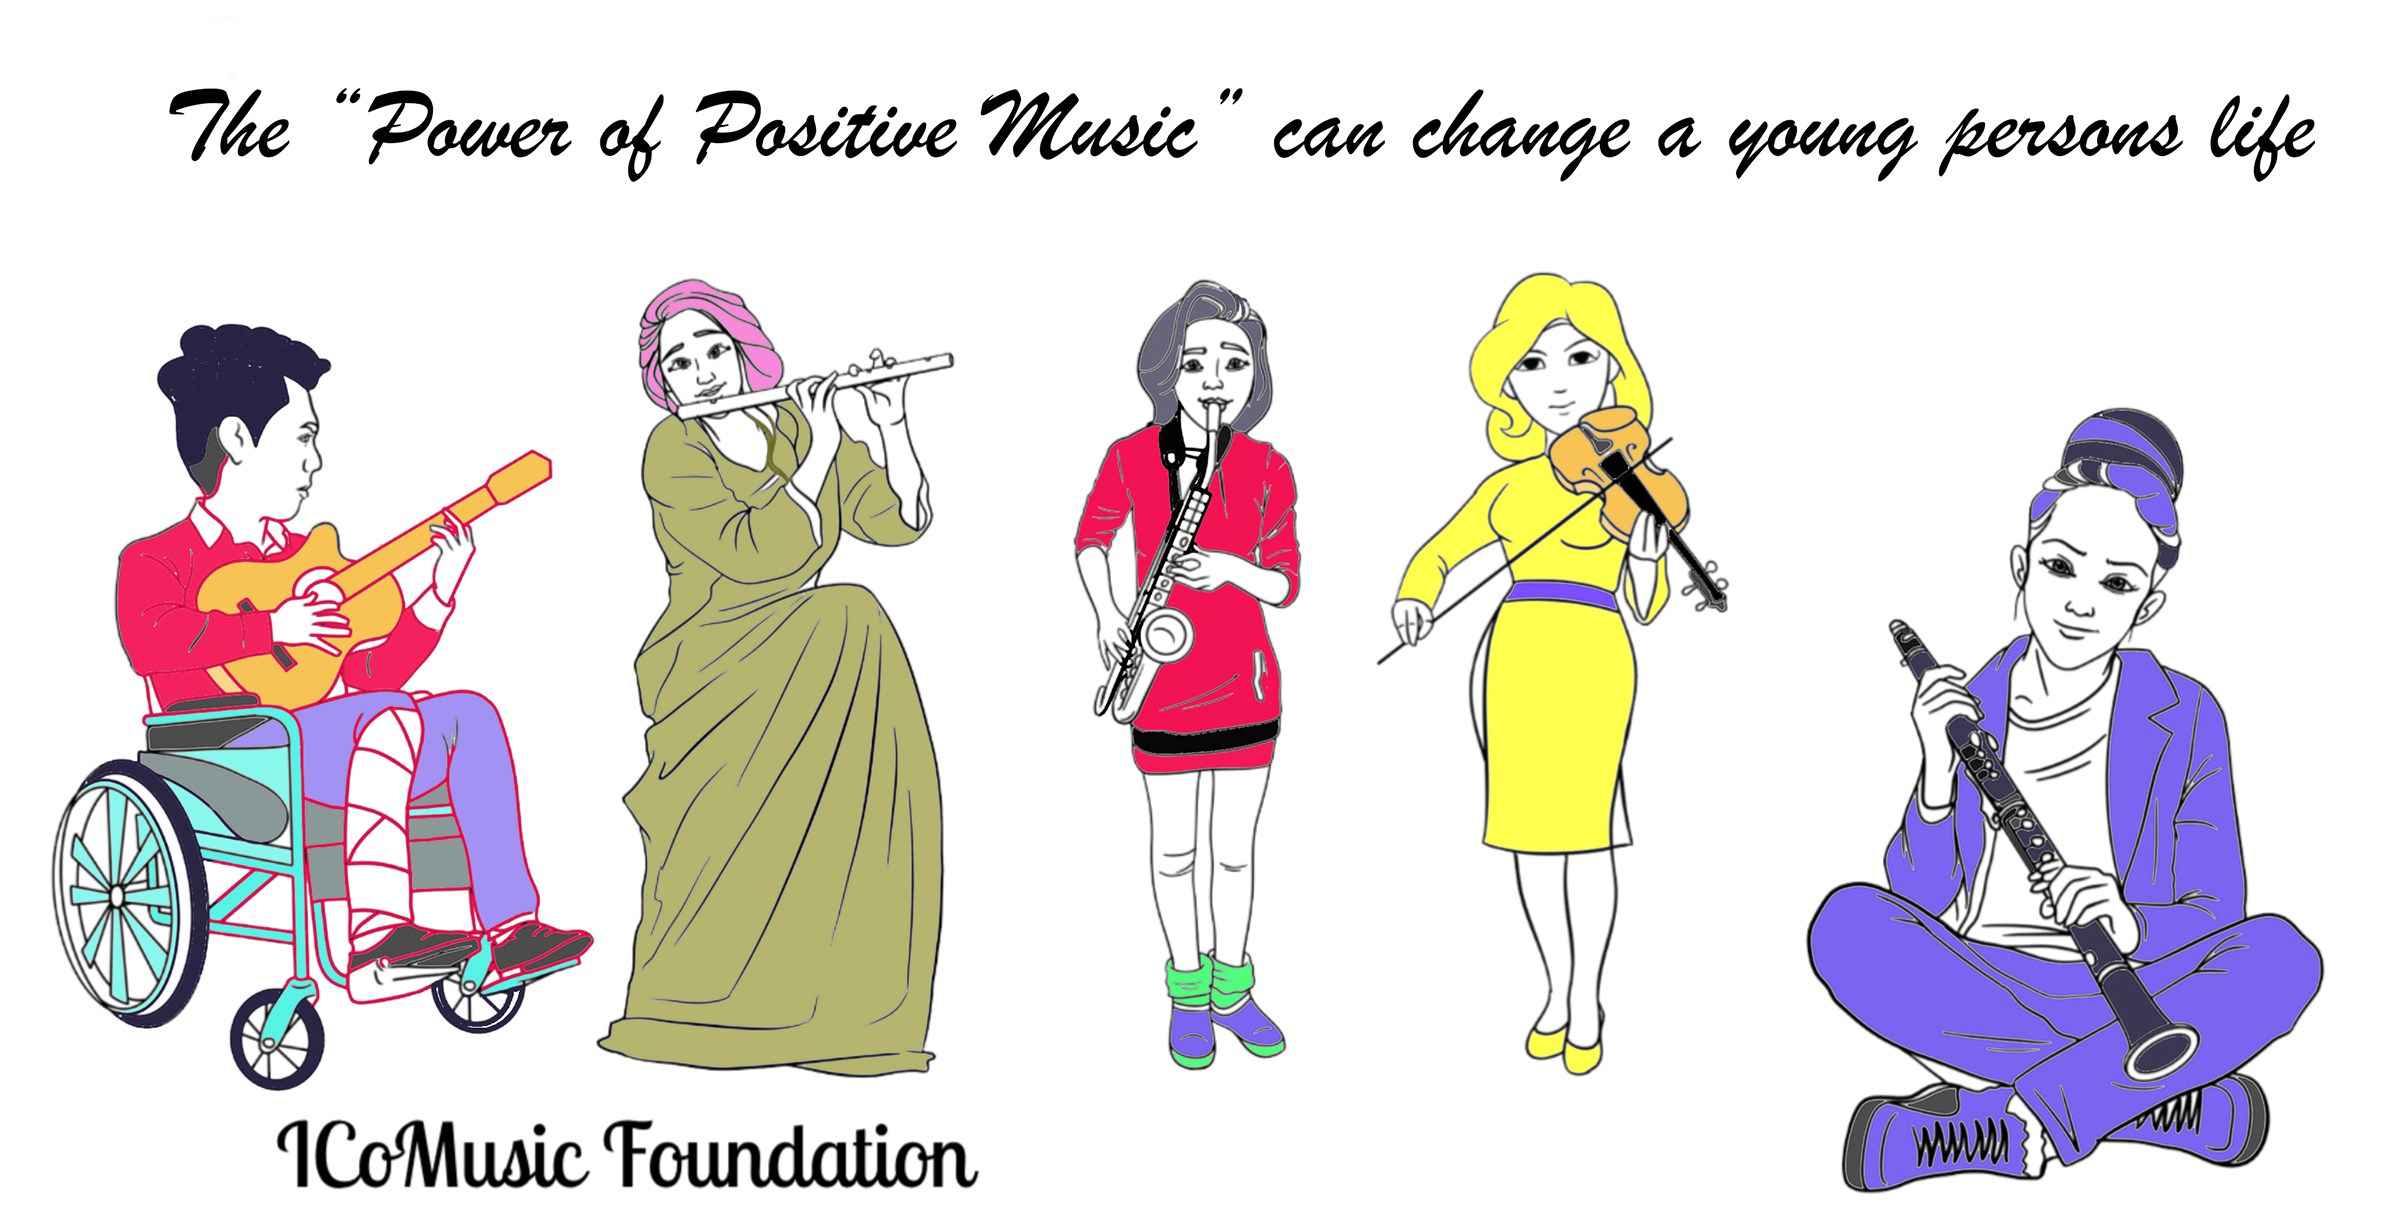 The Power of positive music can change a youjg persons life